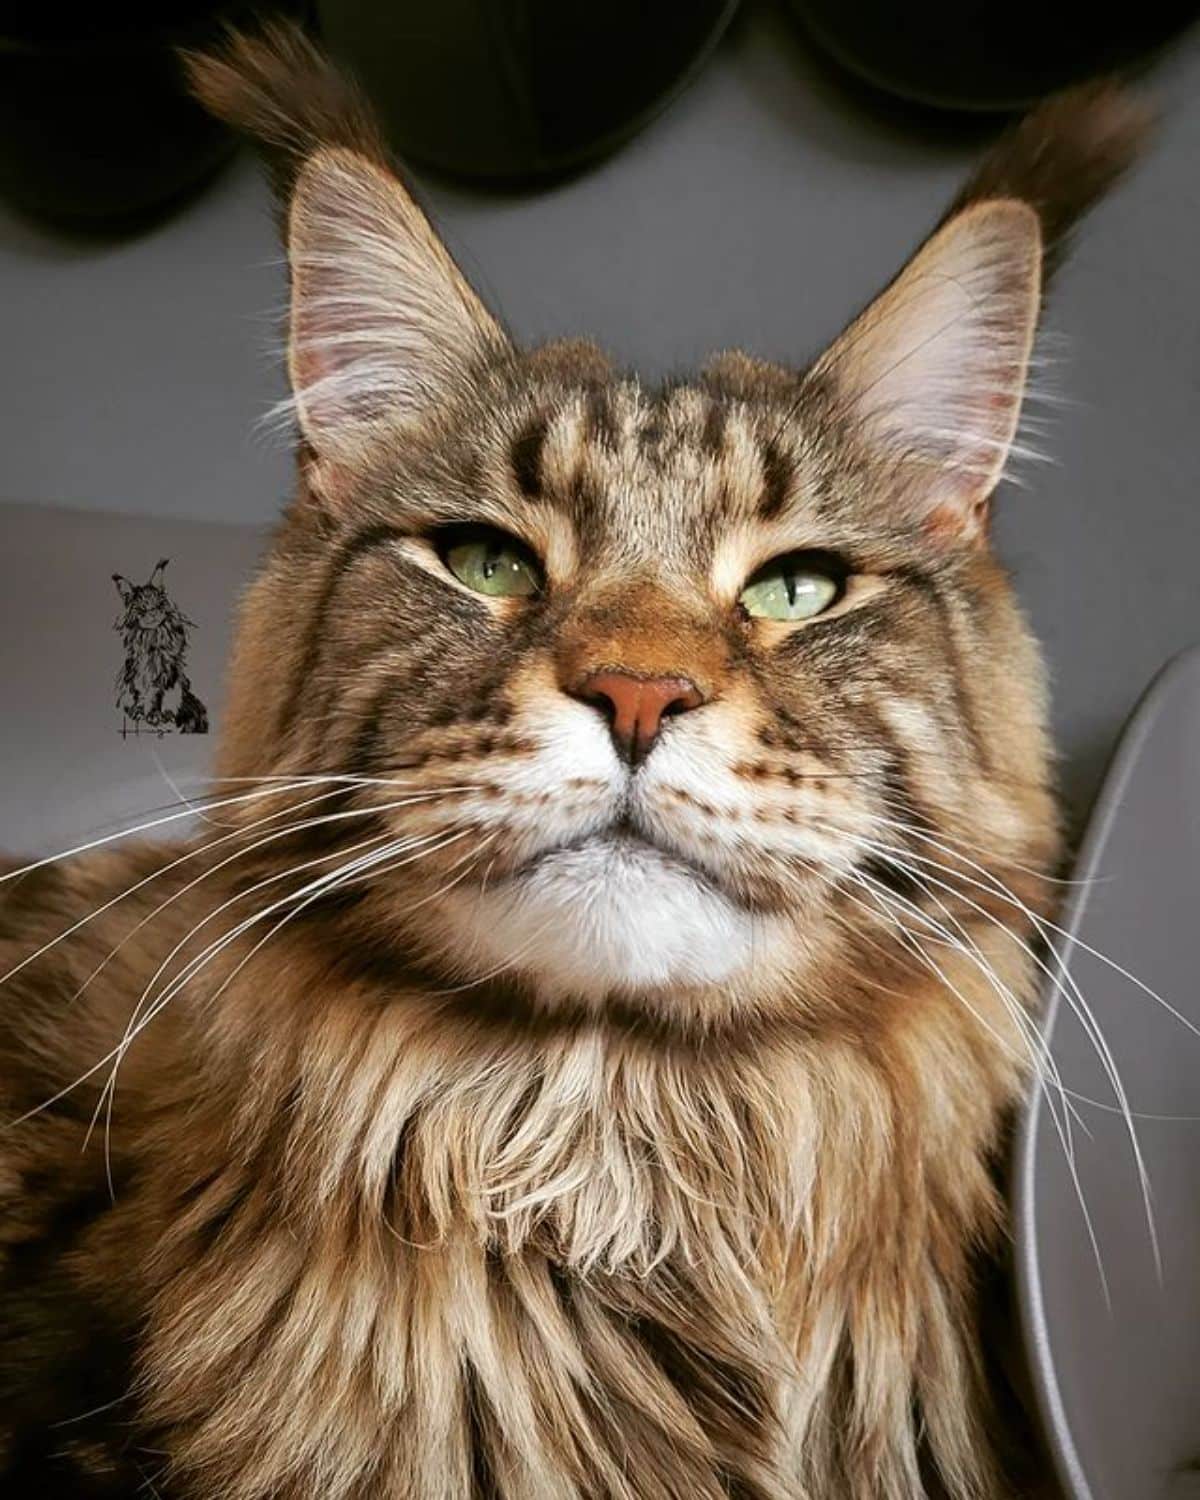 A close-up of a beautiful tabby maine coon.